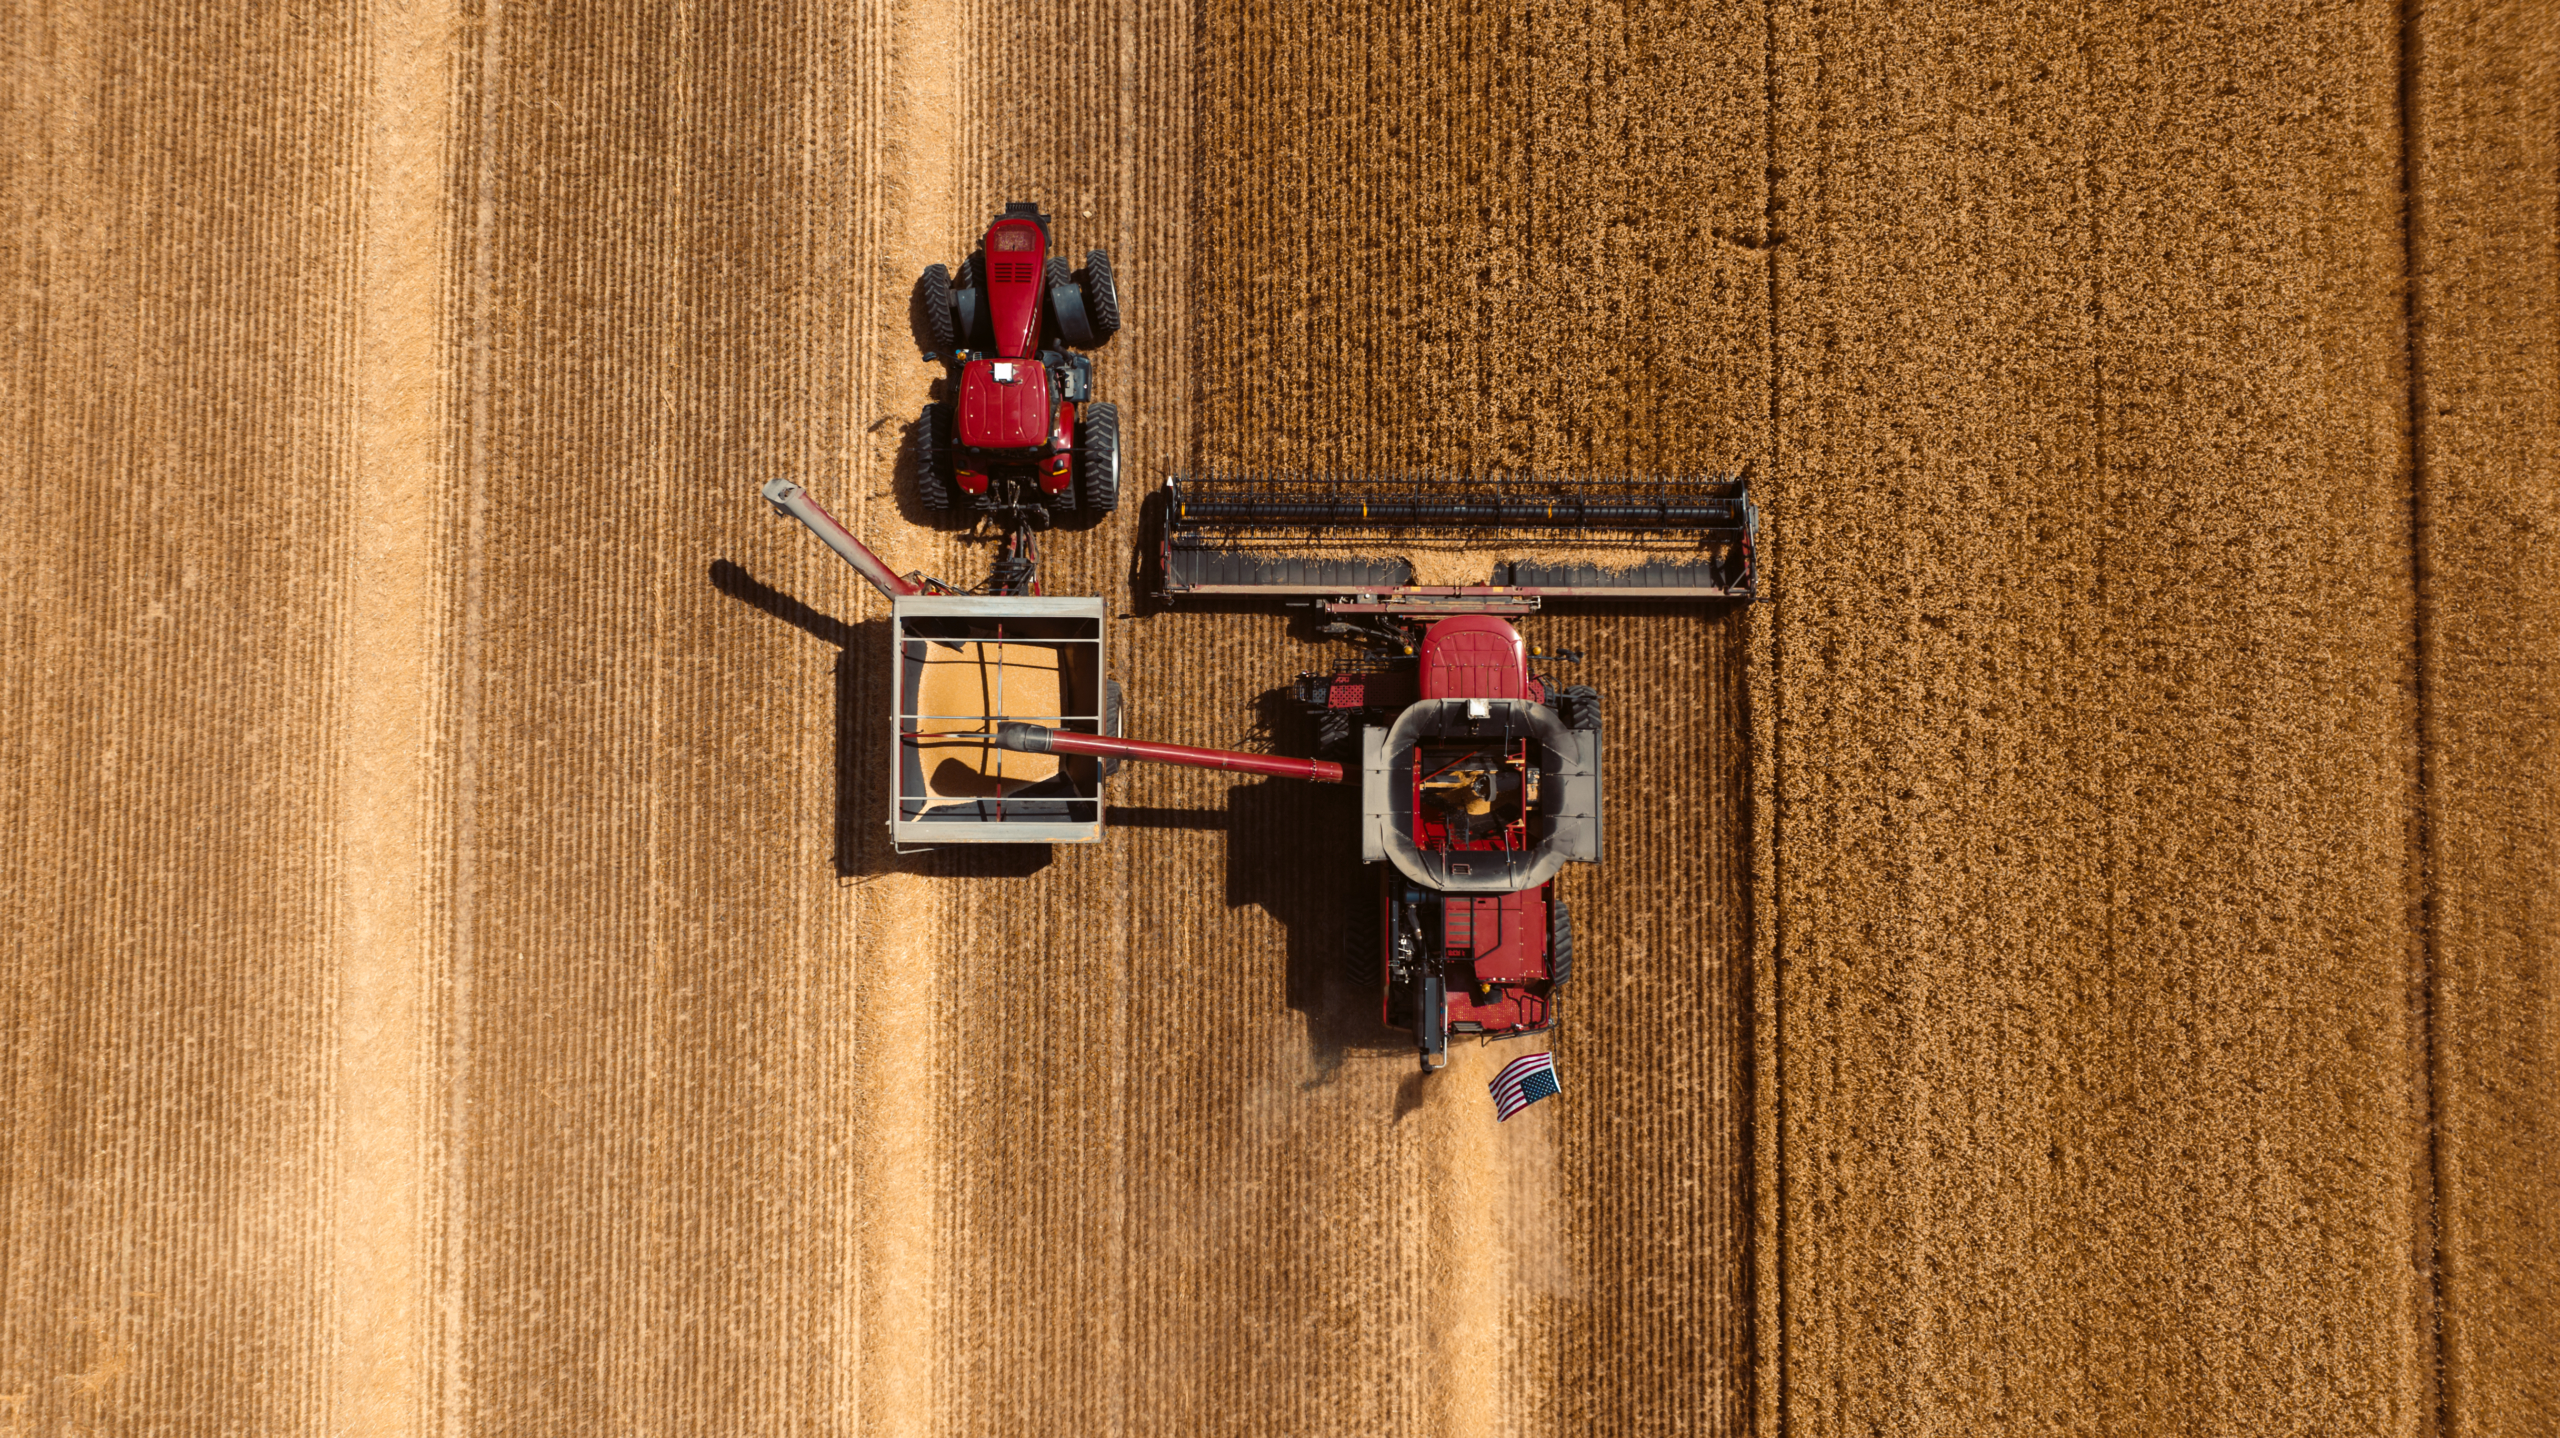 Aerial photo of a red combine harvesting wheat while unloading soft red winter wheat into a wagon pulled by a red, 4WD tractor in Ohio in 2022.